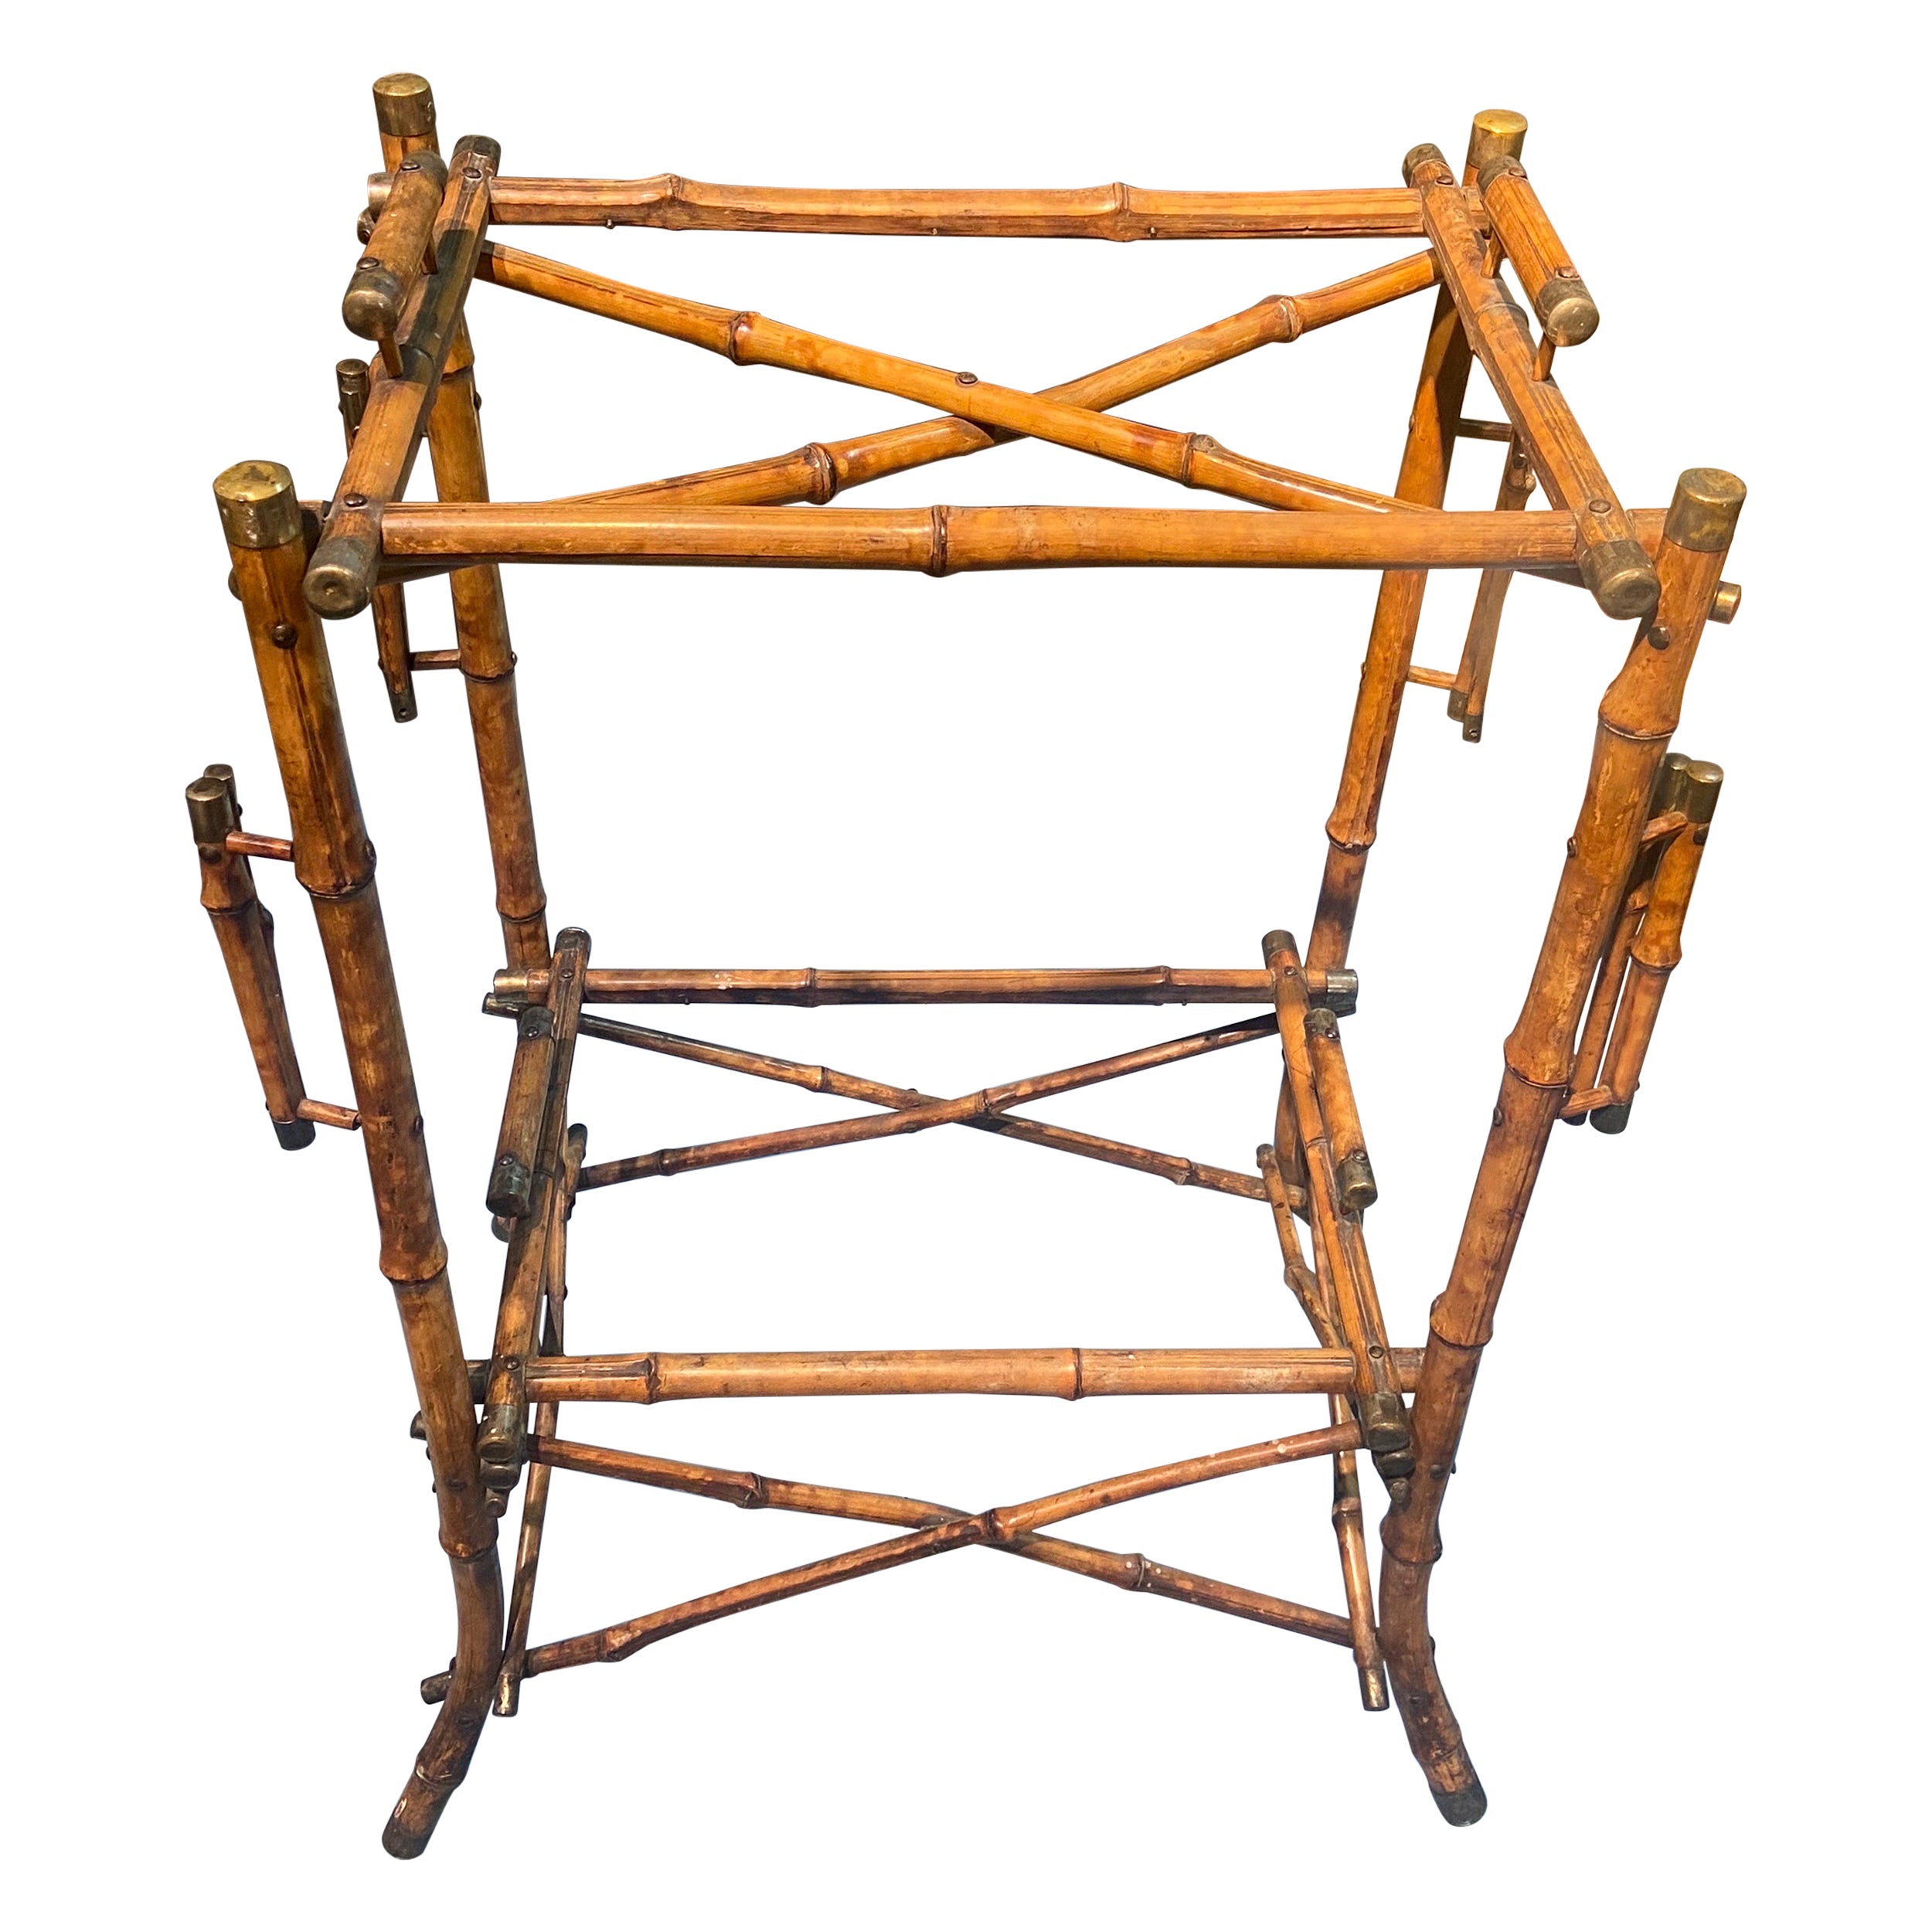 20th Century French Bamboo Serving Bar Cart Trolley with Two Removable Levels